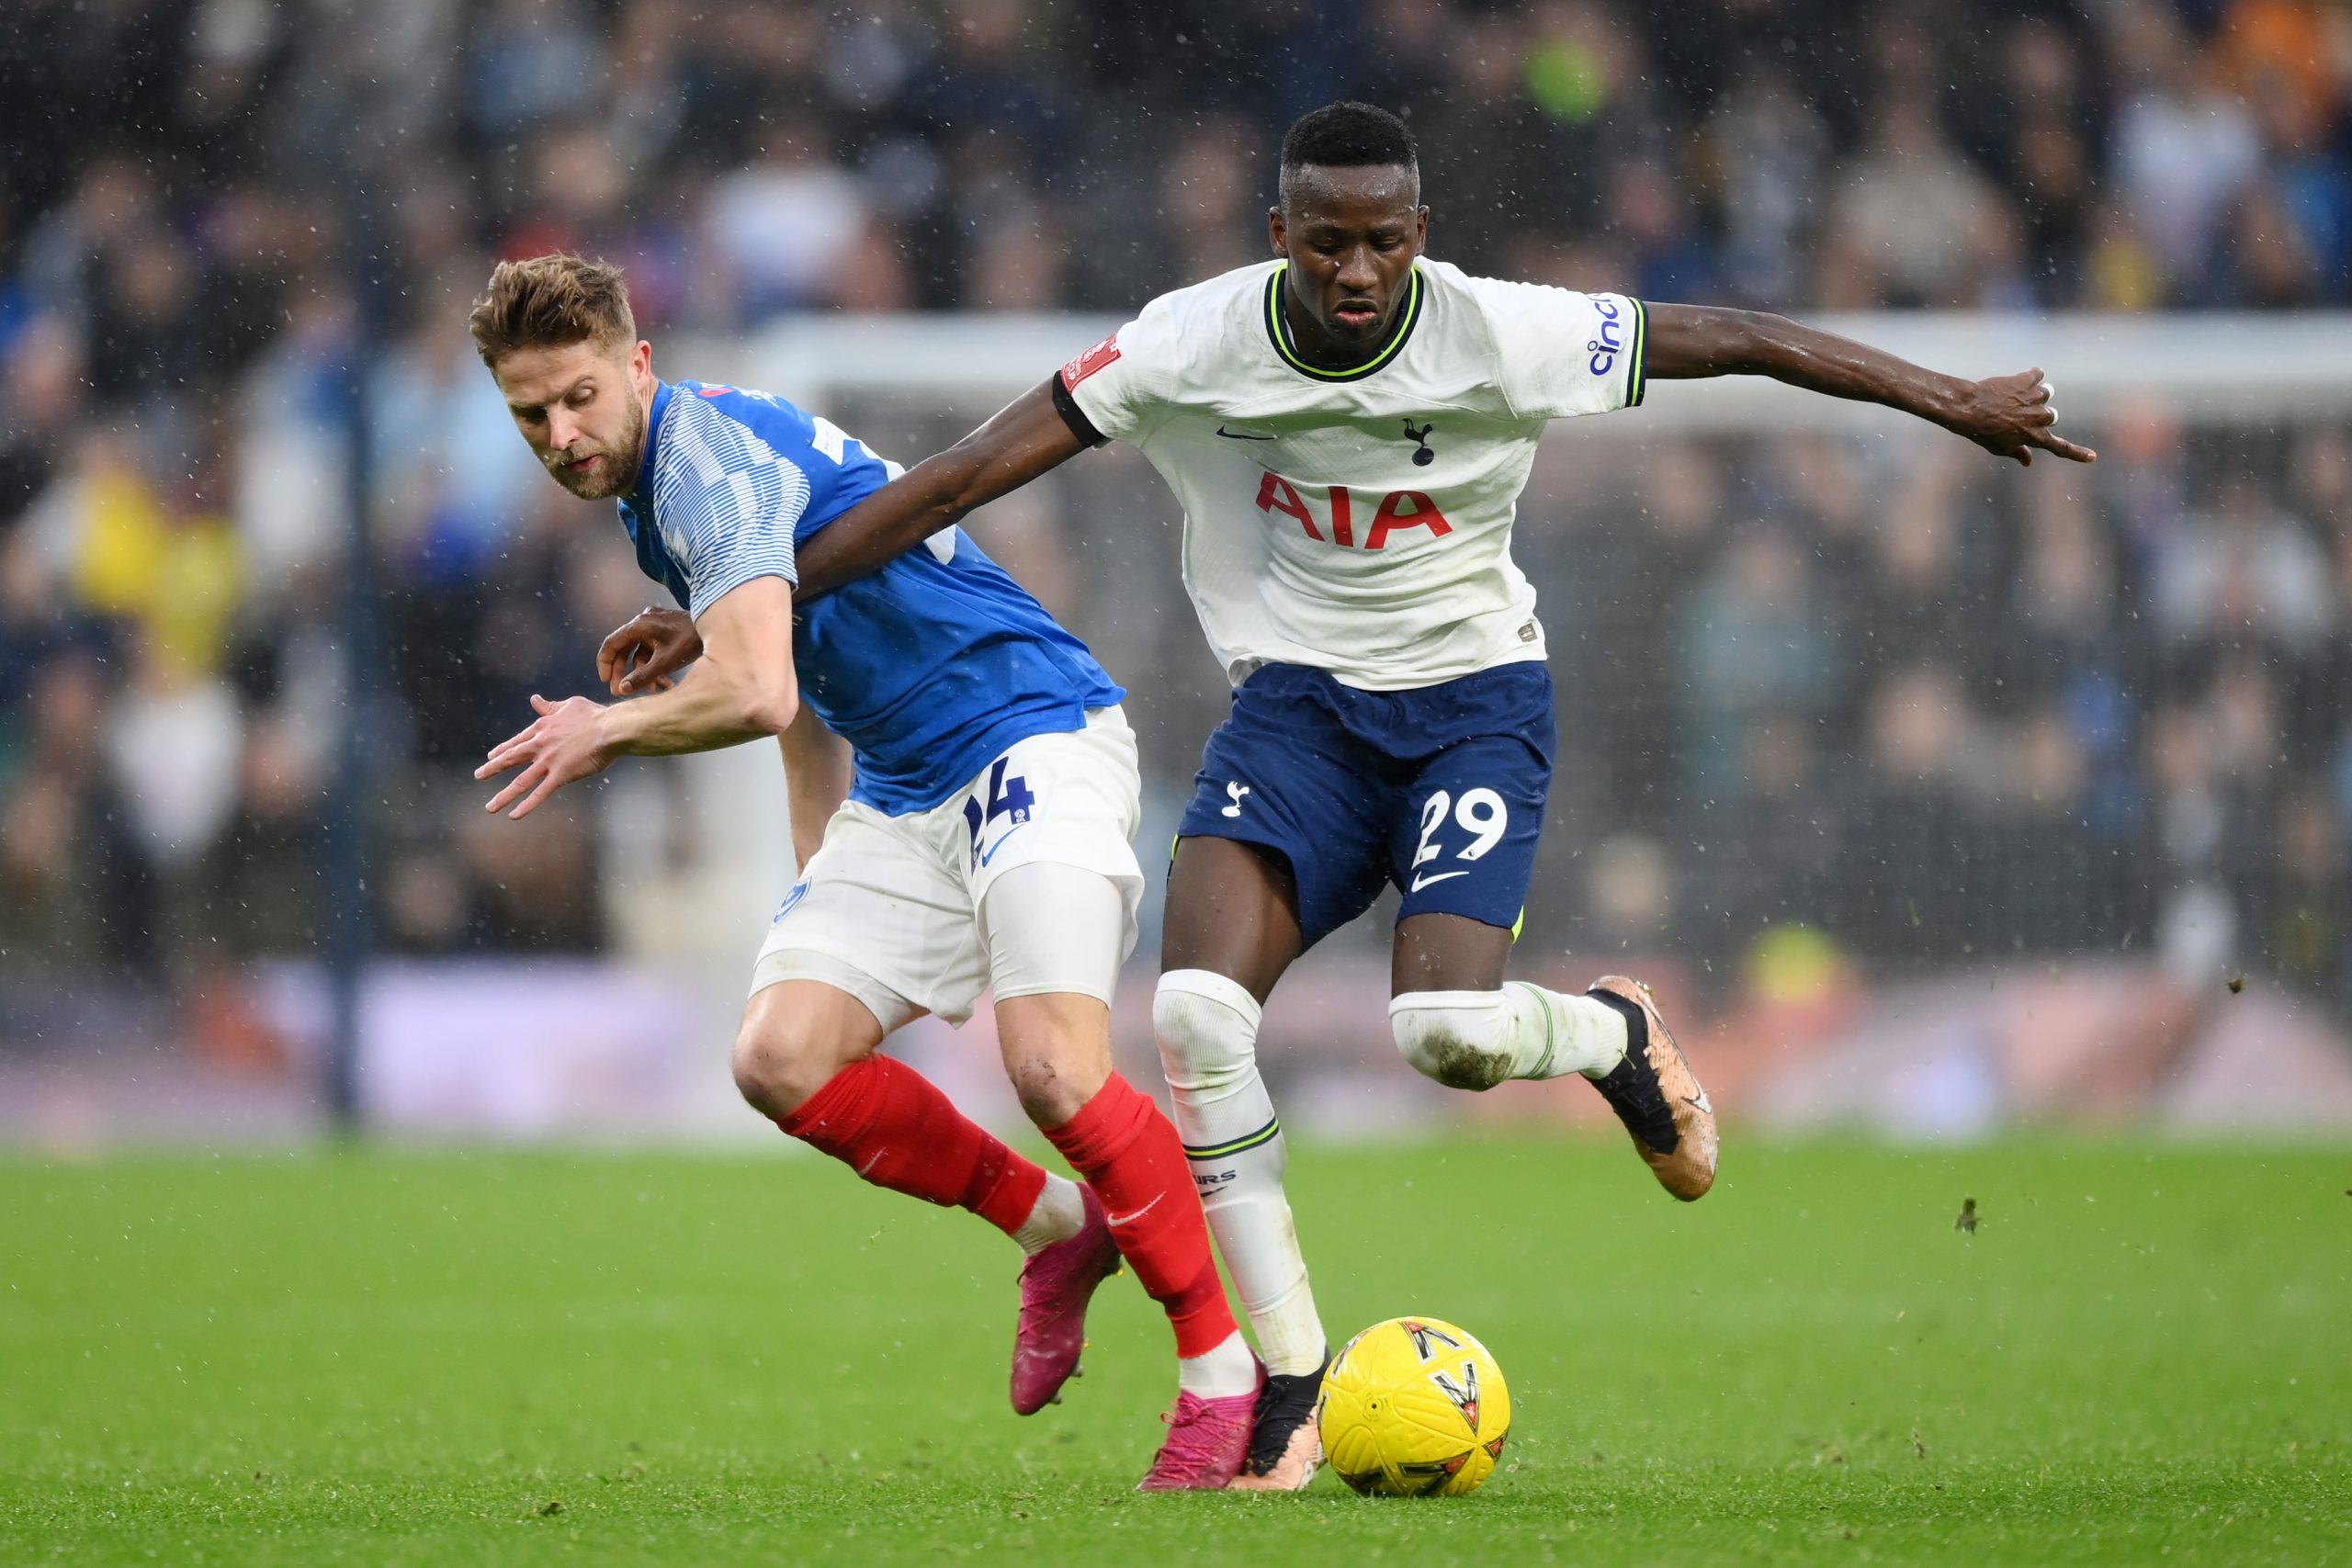 Pape Matar Sarr of Tottenham Hotspur battles for possession with Michael Jacobs of Portsmouth during the Emirates FA Cup Third Round match between Tottenham Hotspur and Portsmouth FC at Tottenham Hotspur Stadium on January 07, 2023 in London, England. (Photo by Shaun Botterill/Getty Images)